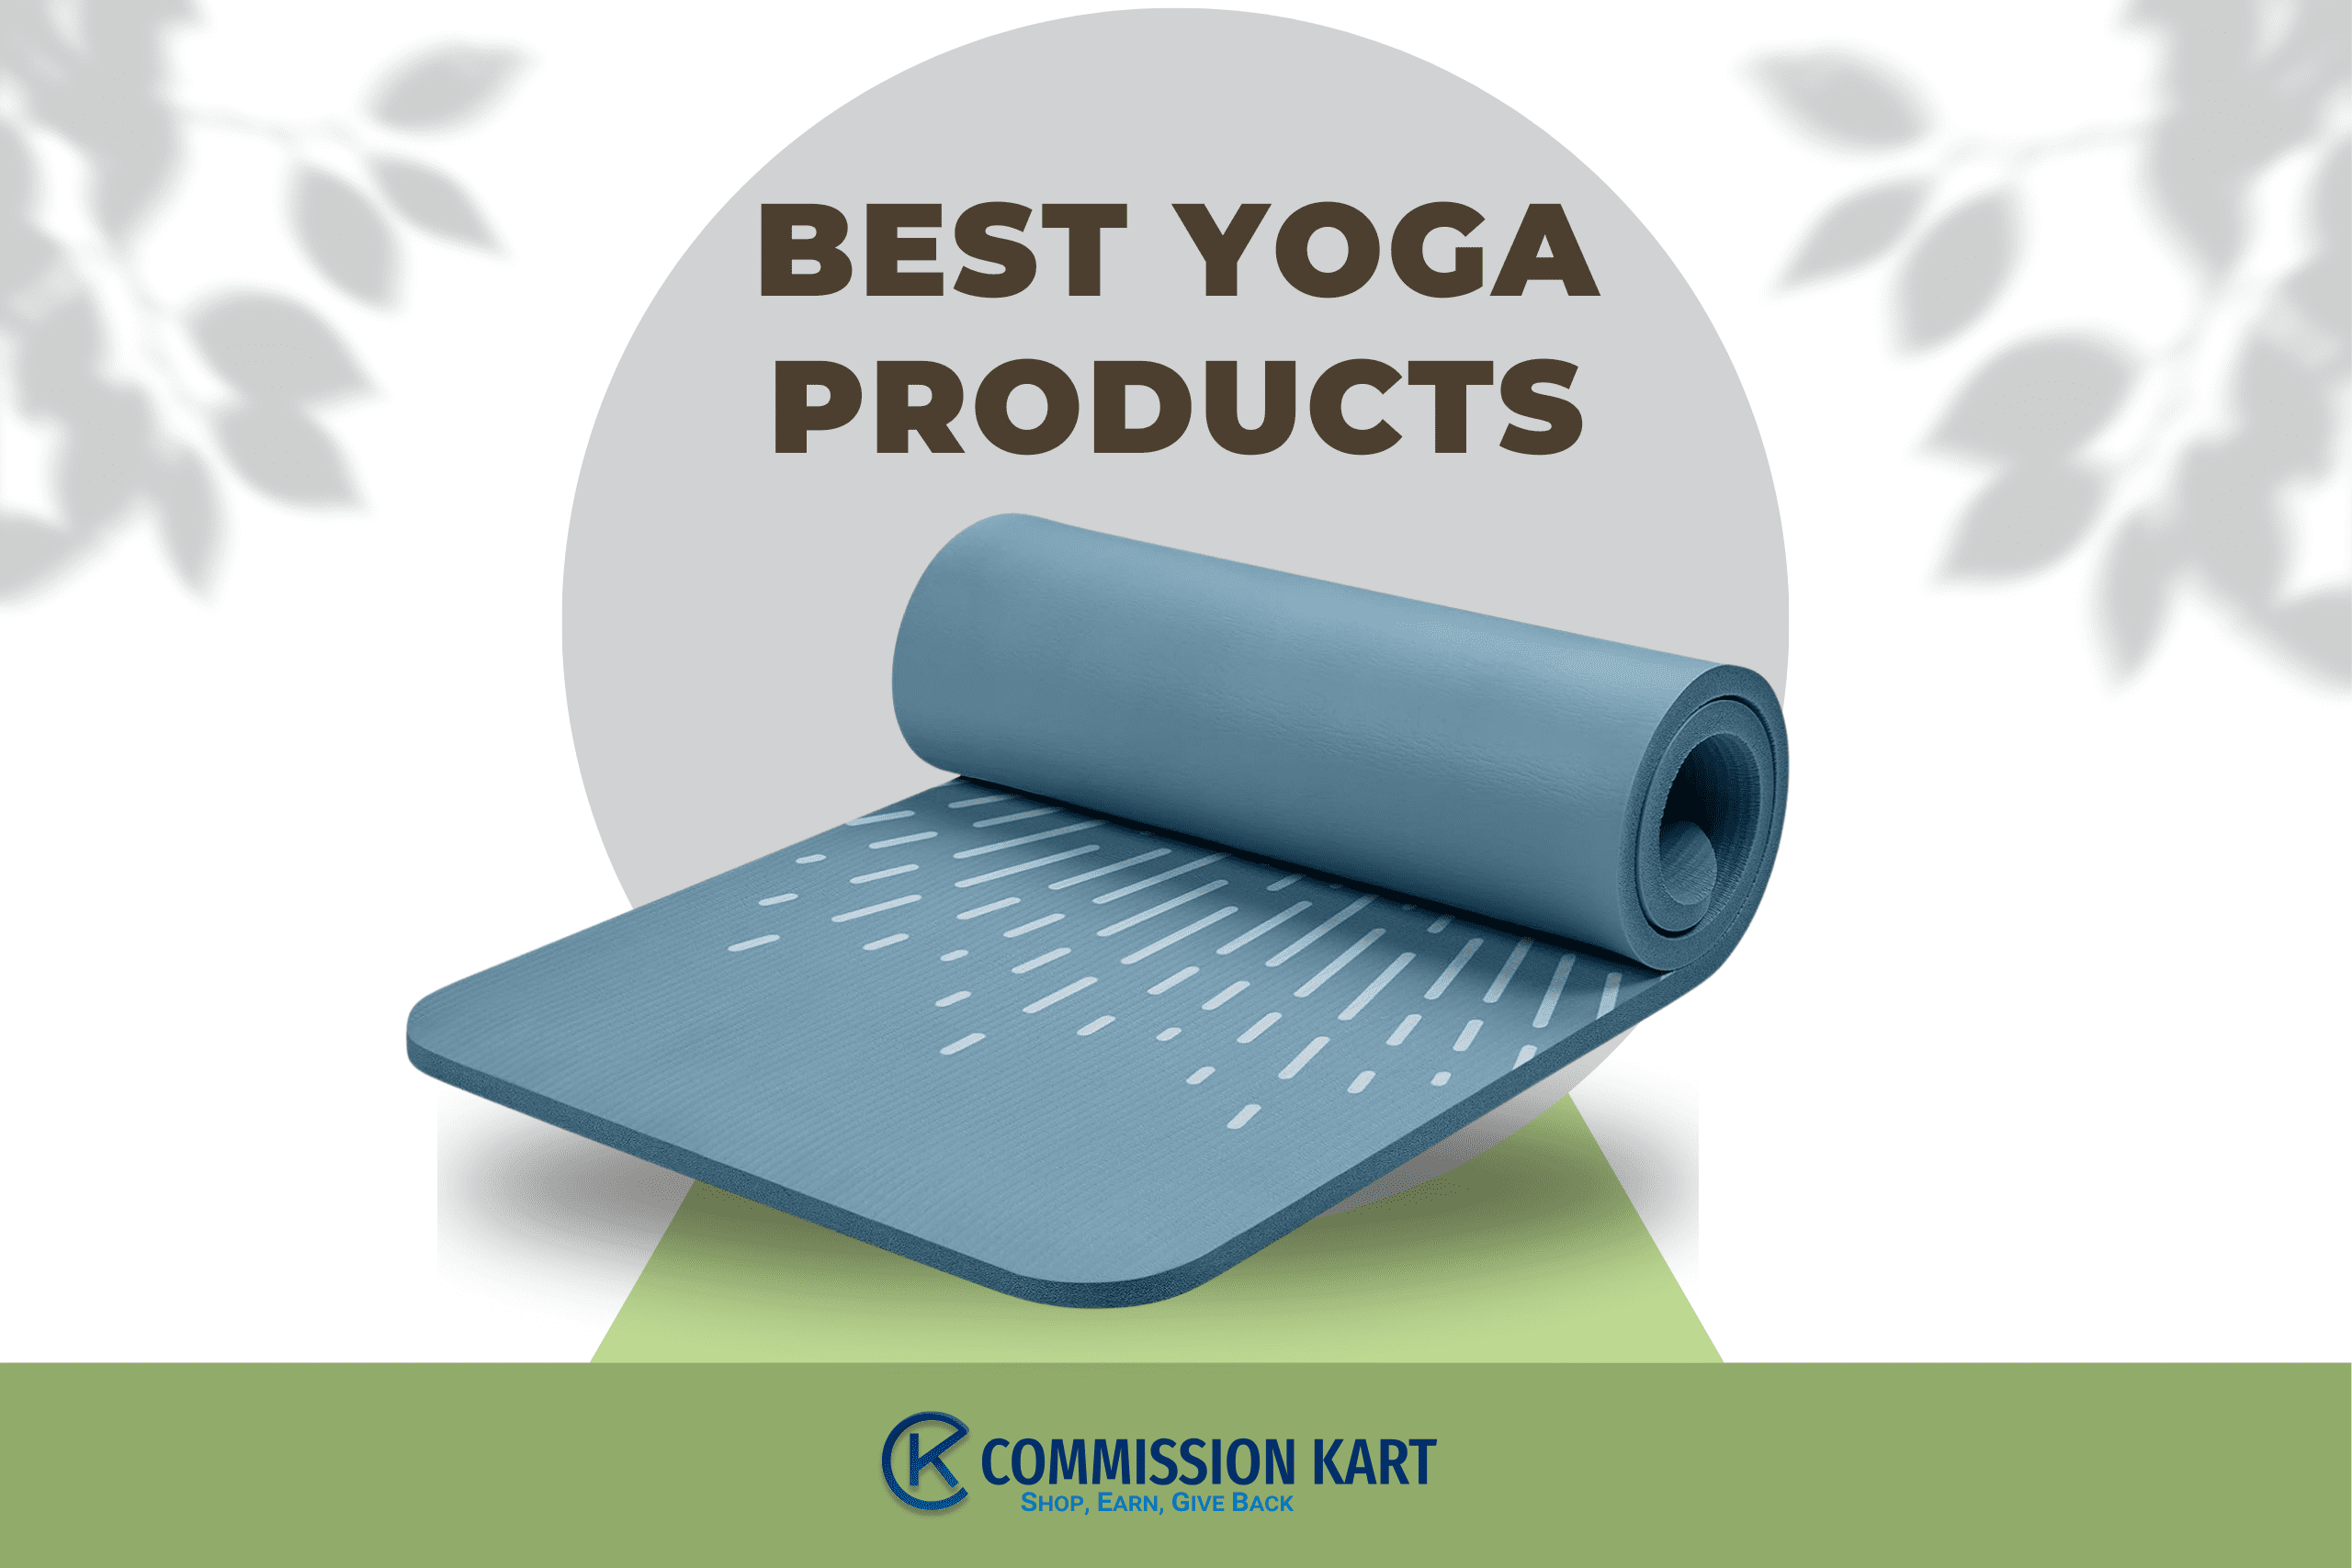 Amazon Yoga Day GOLDMINE: Find the BEST Yoga Products at UNBEATABLE Prices